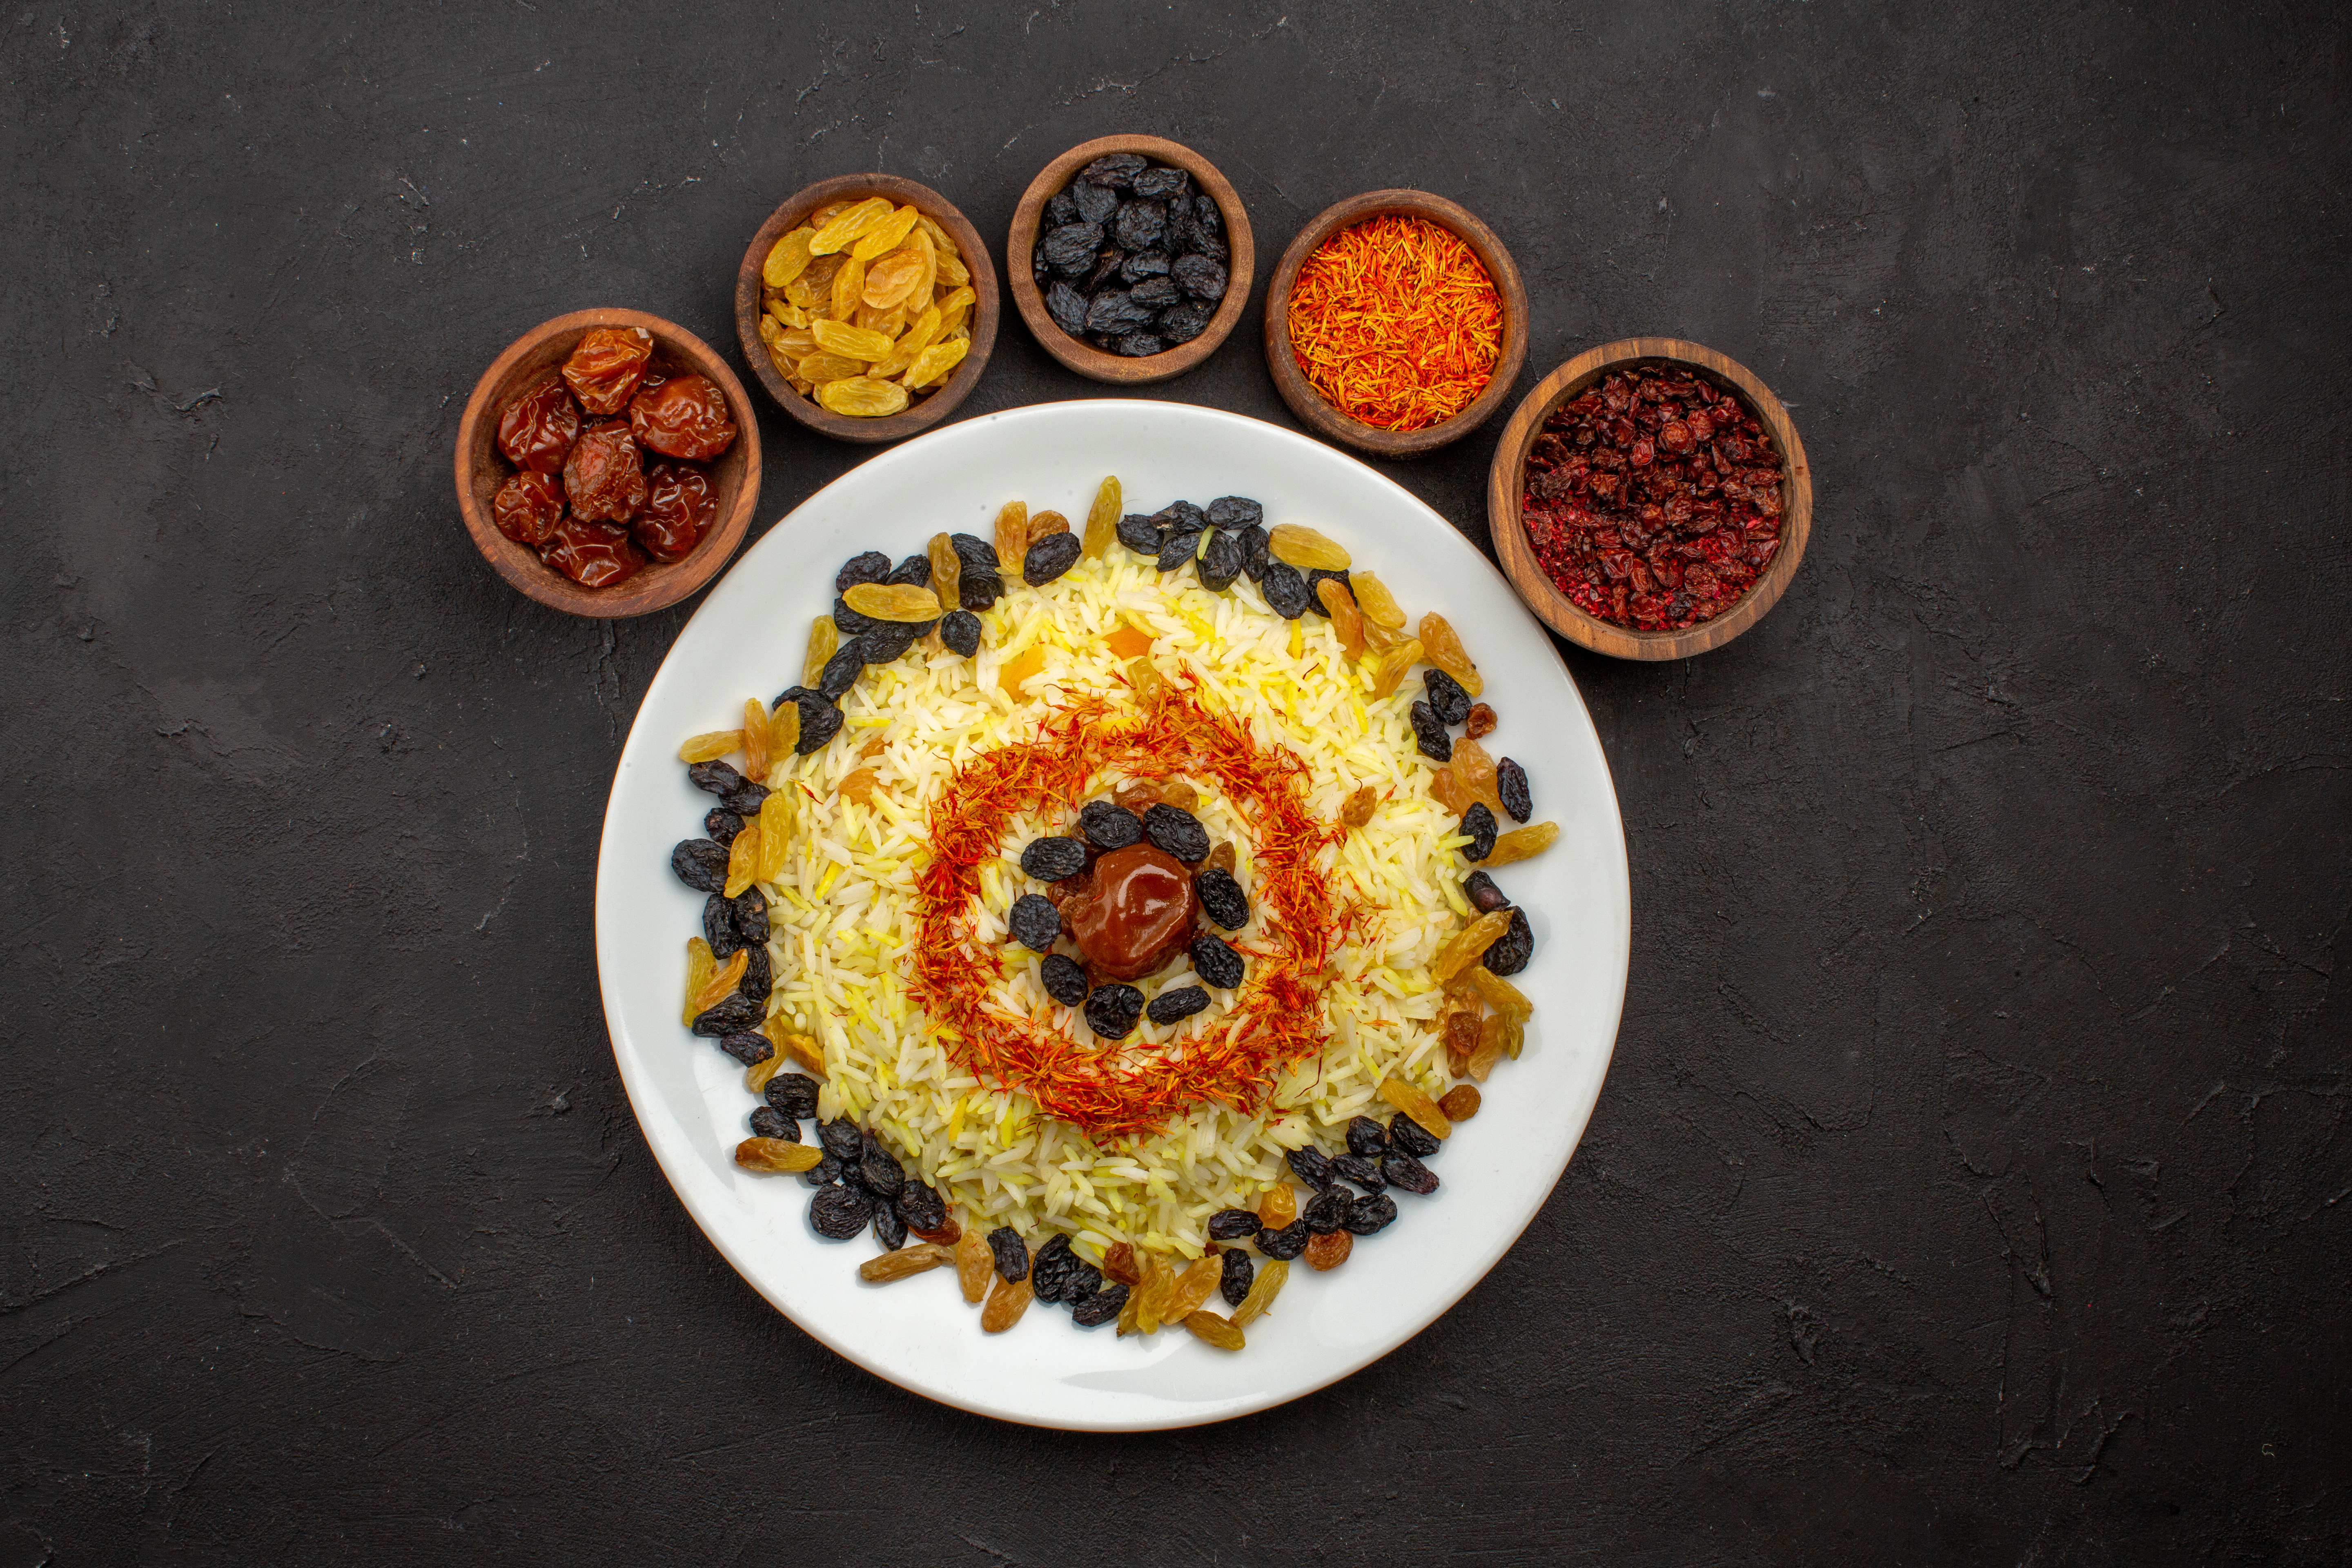 Some of the delicious toppings that bring out the flavor in the plov